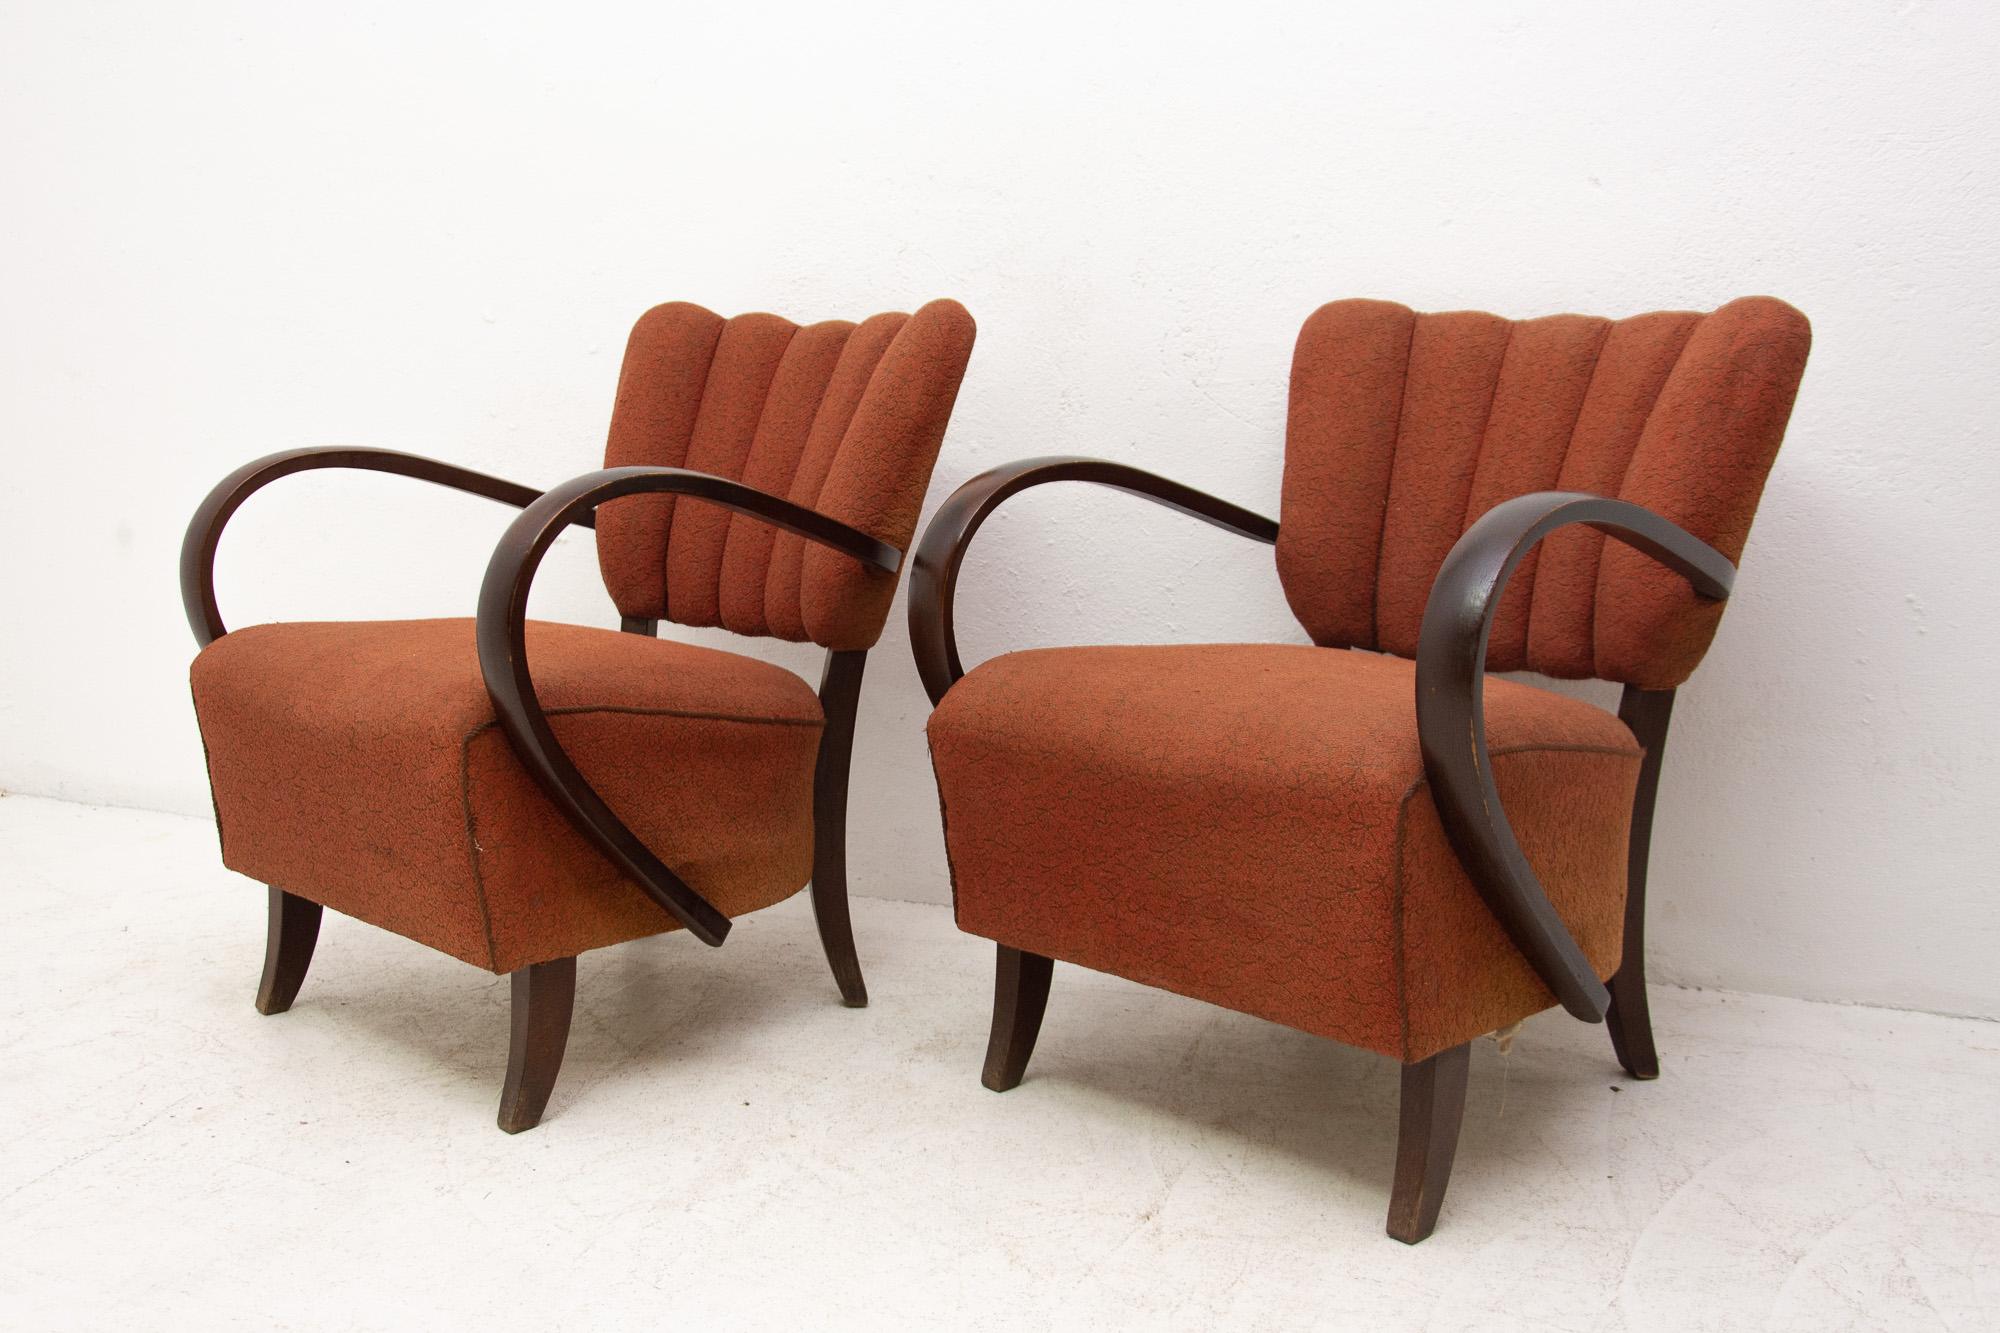 Fabric Pair of H-237 Cocktail Armchairs by Jindrich Halabala, Czechoslovakia, 1950s